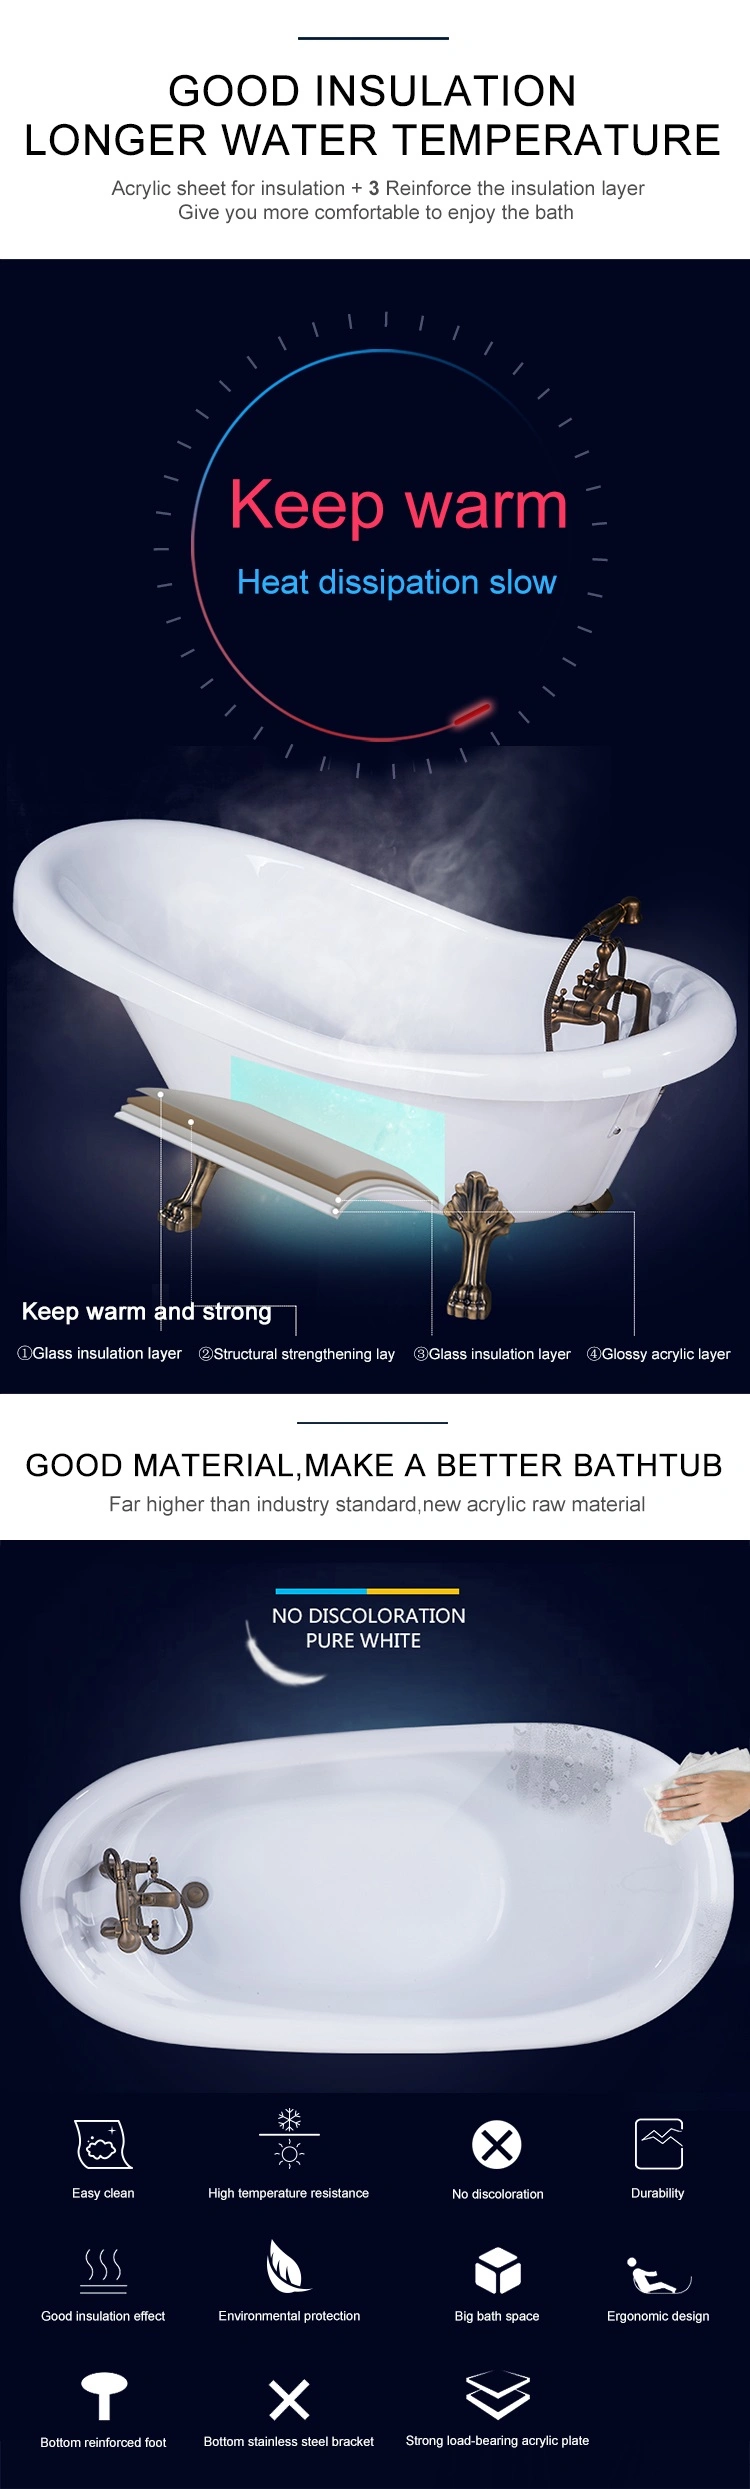 Unique Design Classical Free Standing Clawfoot Bathtub with Faucet